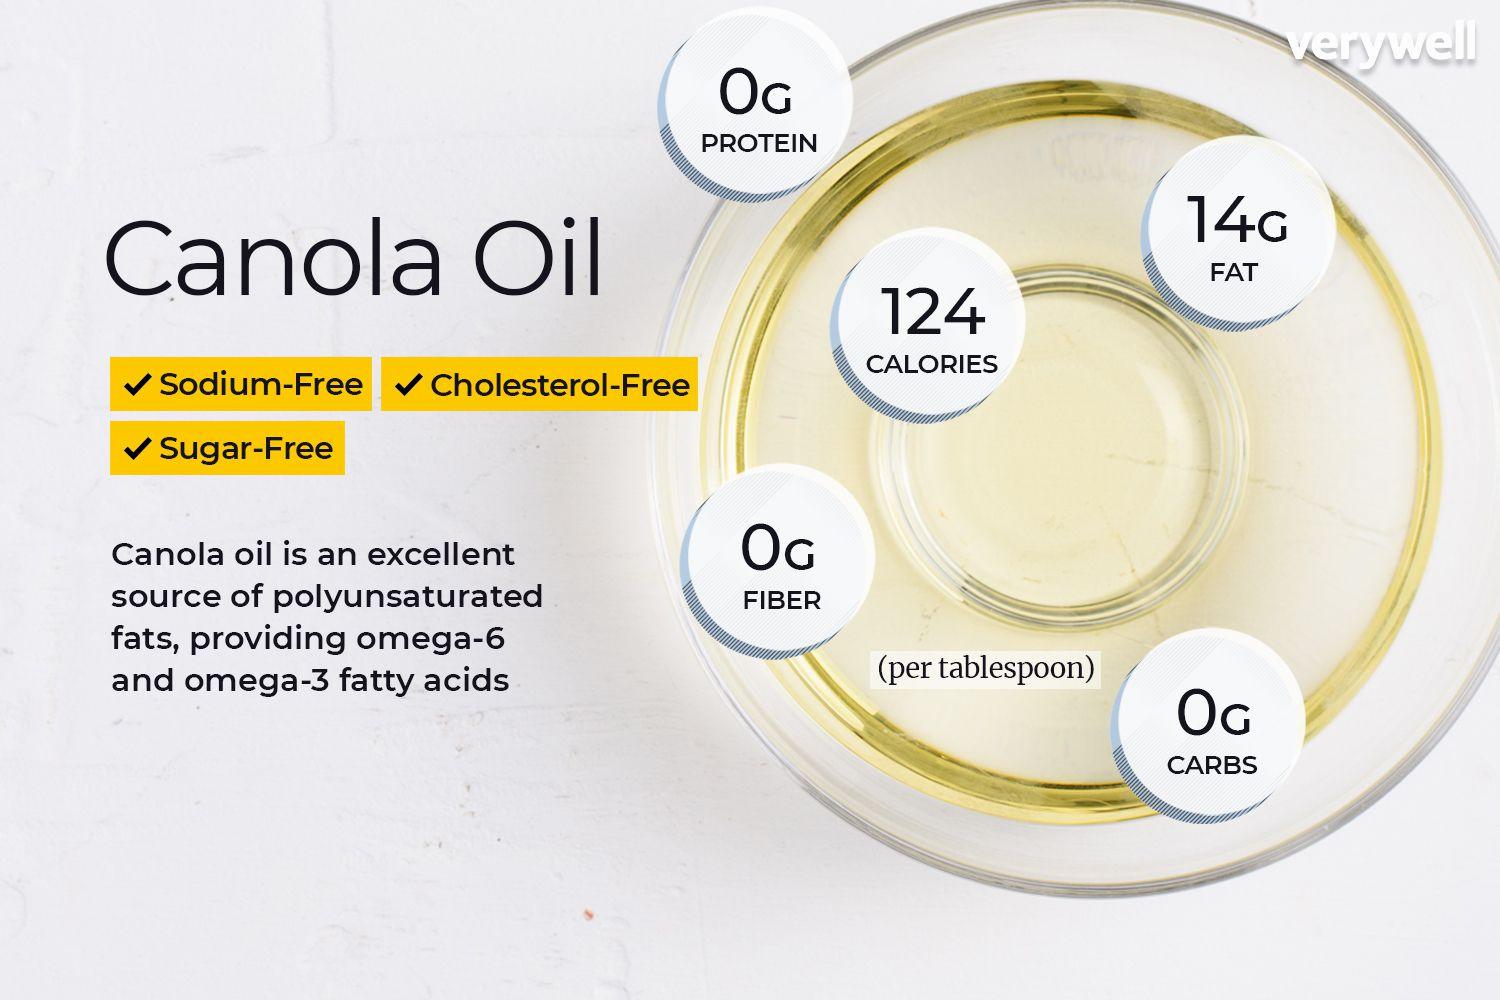 A table showing the nutritional value of canola oil, including its calorie, fat, carbohydrate, protein, and fiber content.